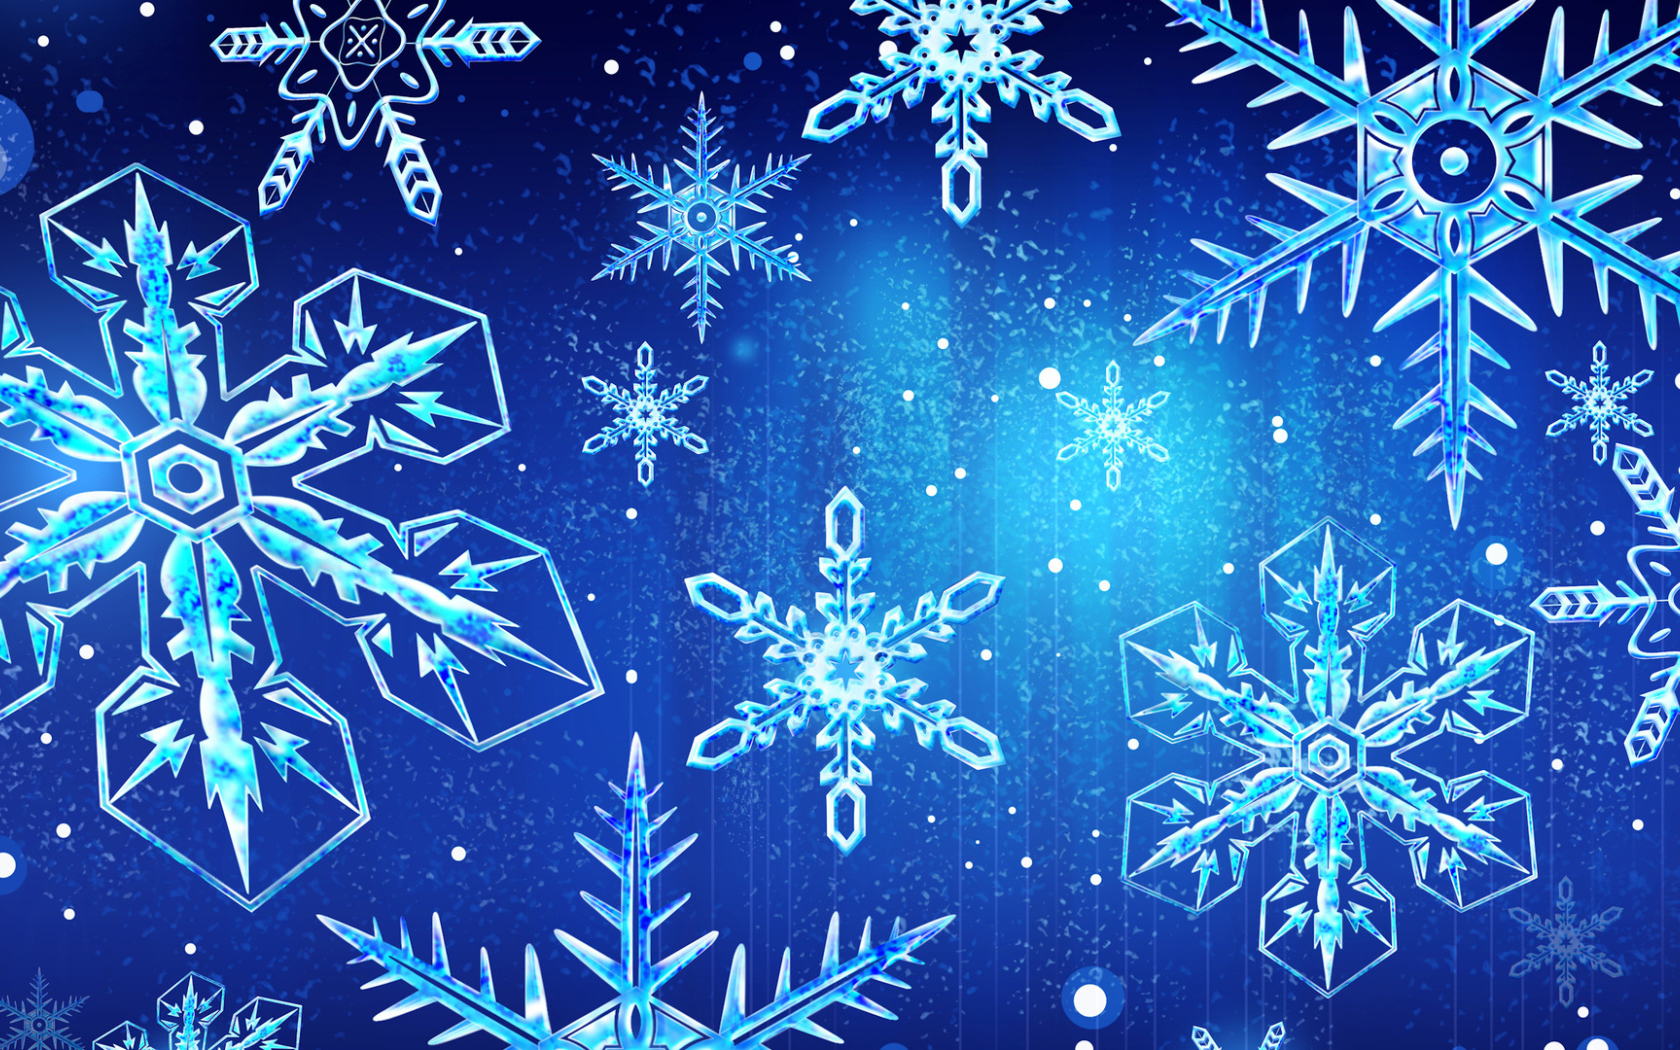 Icy snowflakes on a blue background